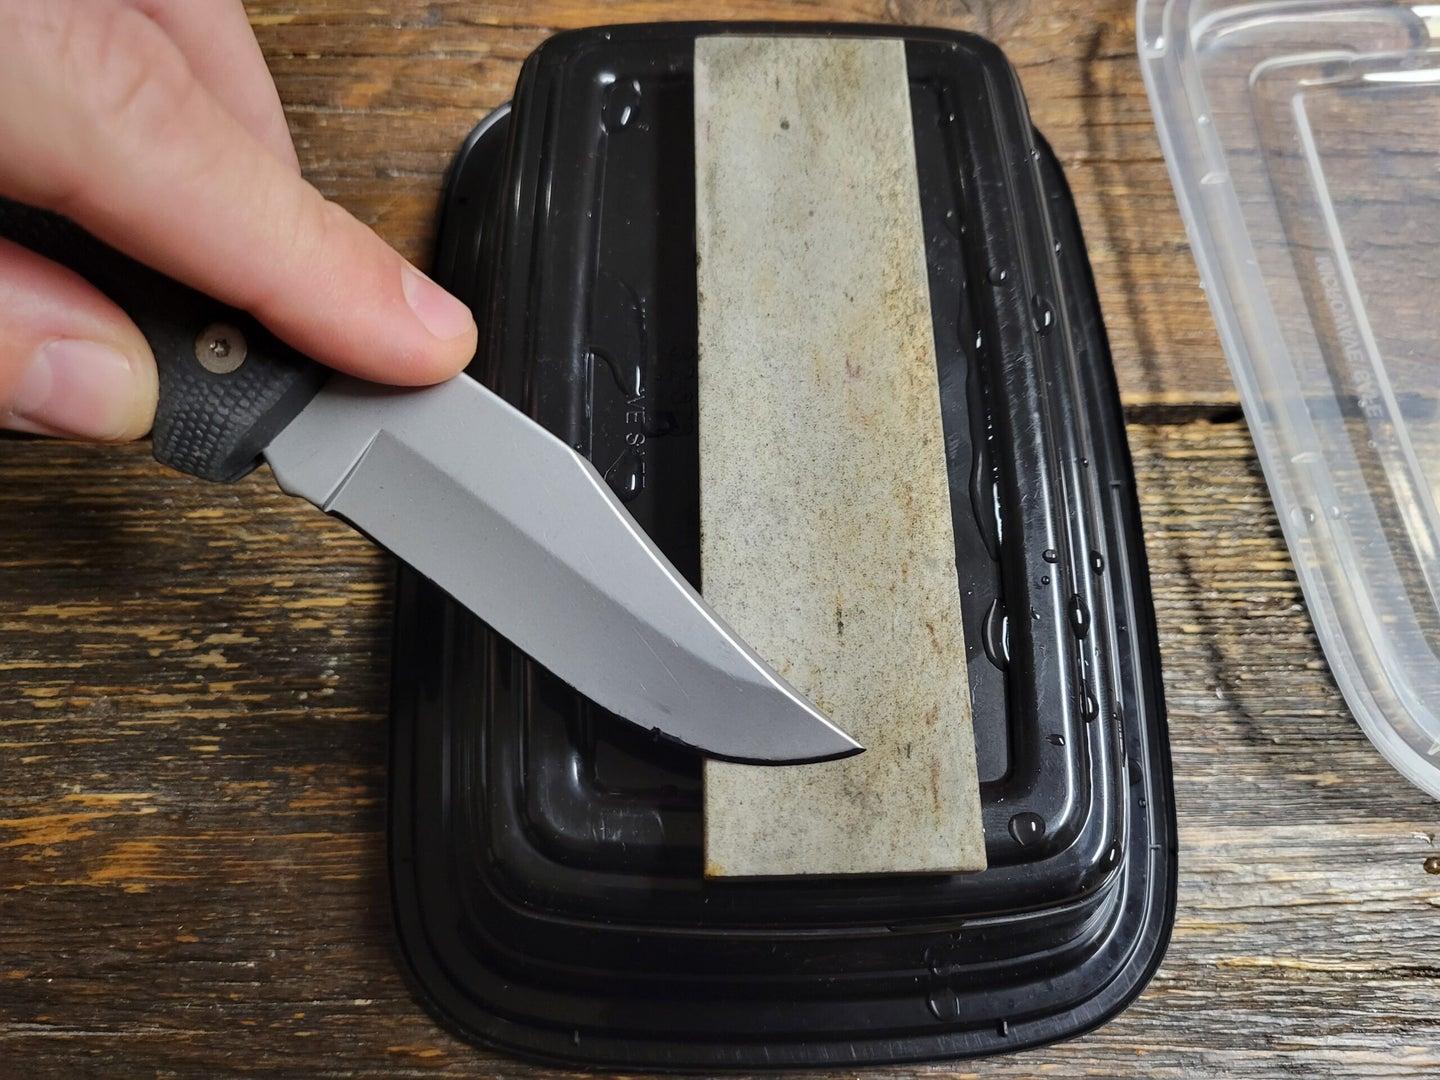 Master the Art of Knife Sharpening: Using Stones to Enhance Your Kitchen Skills